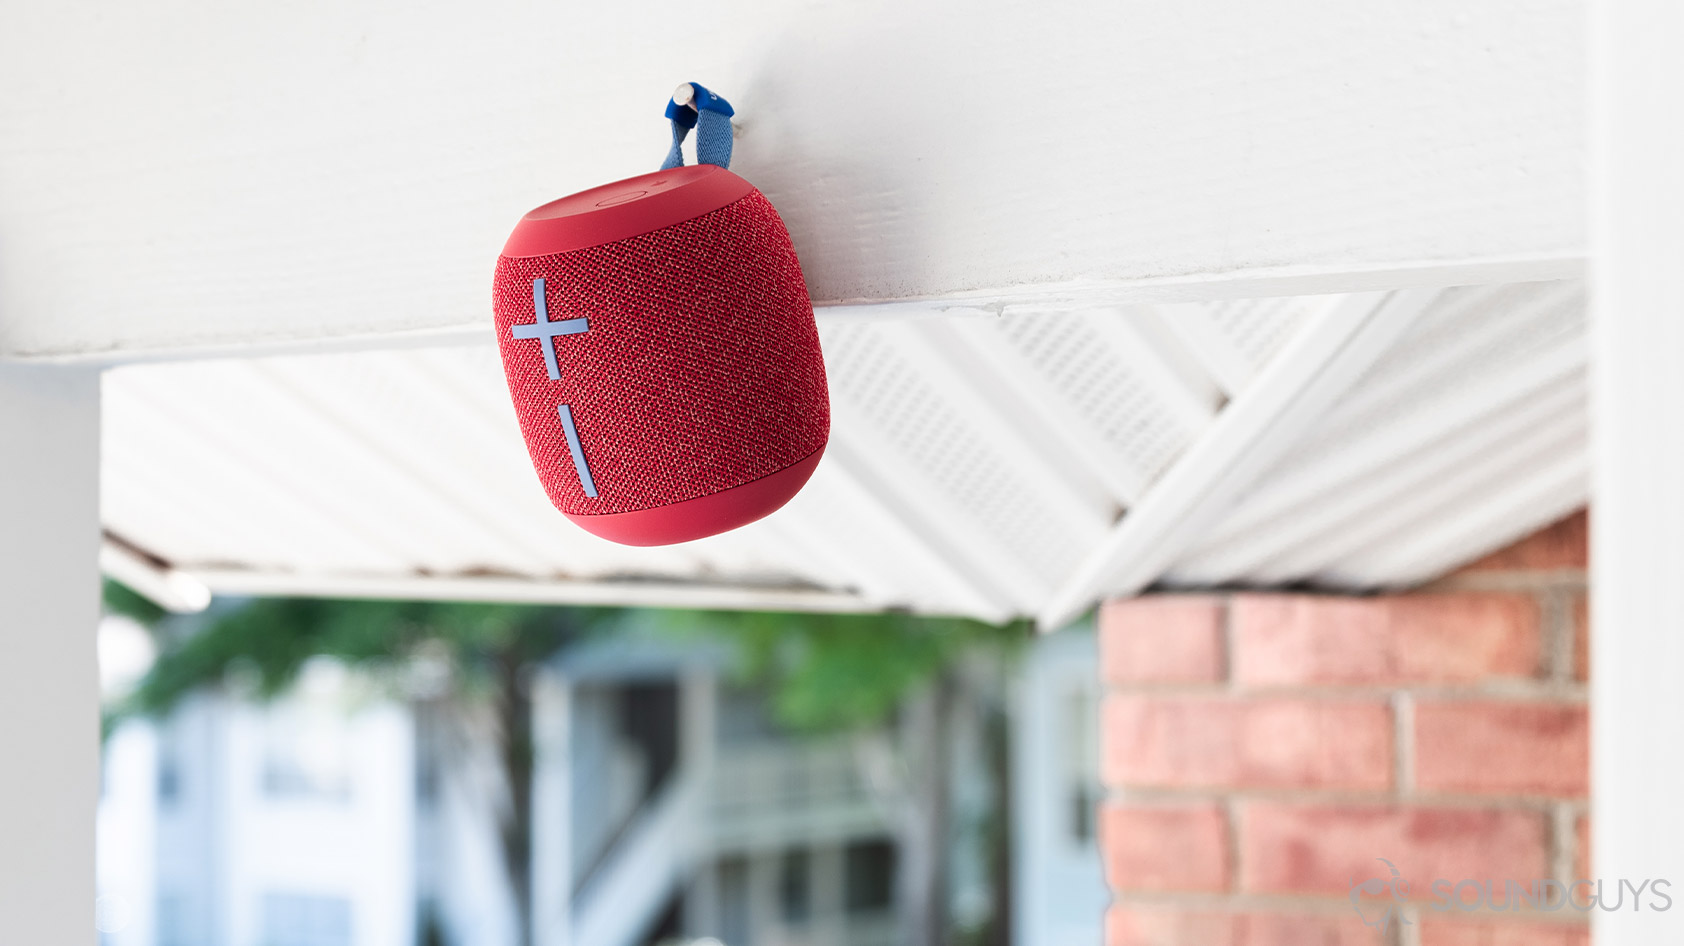 The UE Wonderboom 2 speaker hanging from a nail on a balcony.